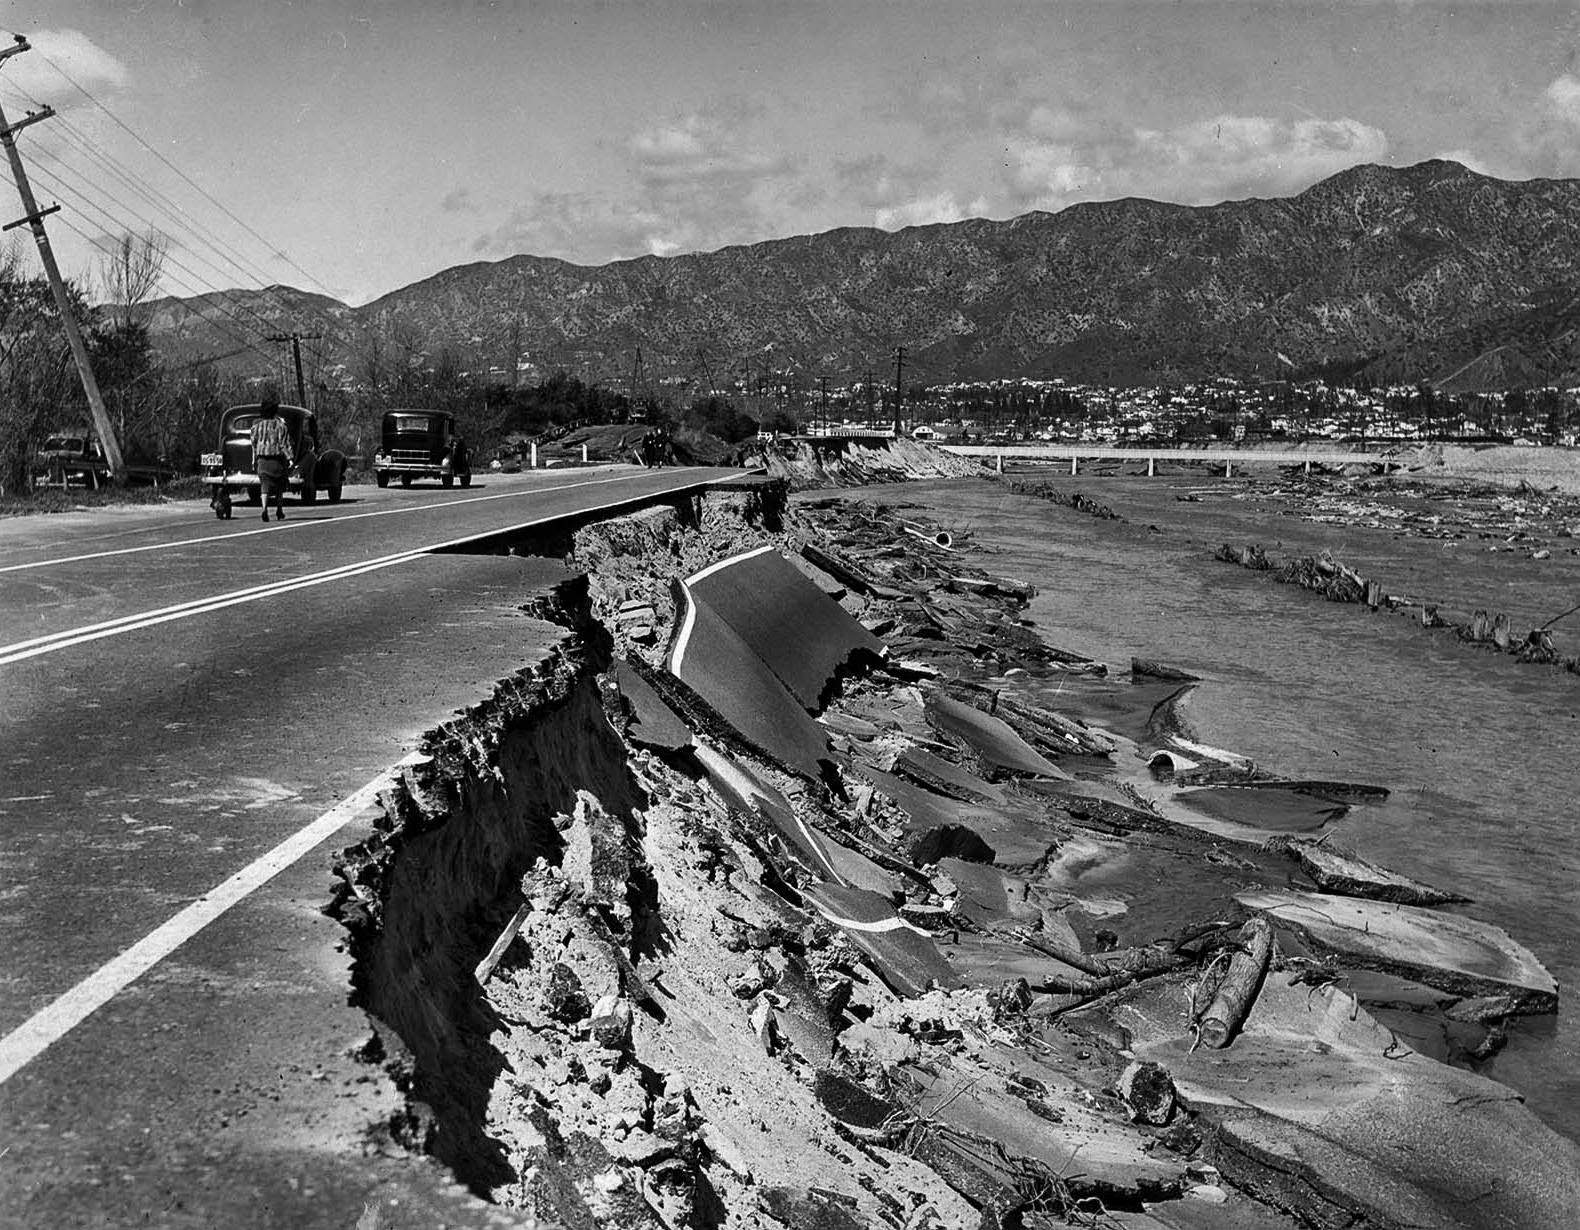 Heavily traveled Riverside Drive in Glendale was undermined by the torrent of the Los Angeles River. This damaged section was near the former Grand Central Airport, 1938